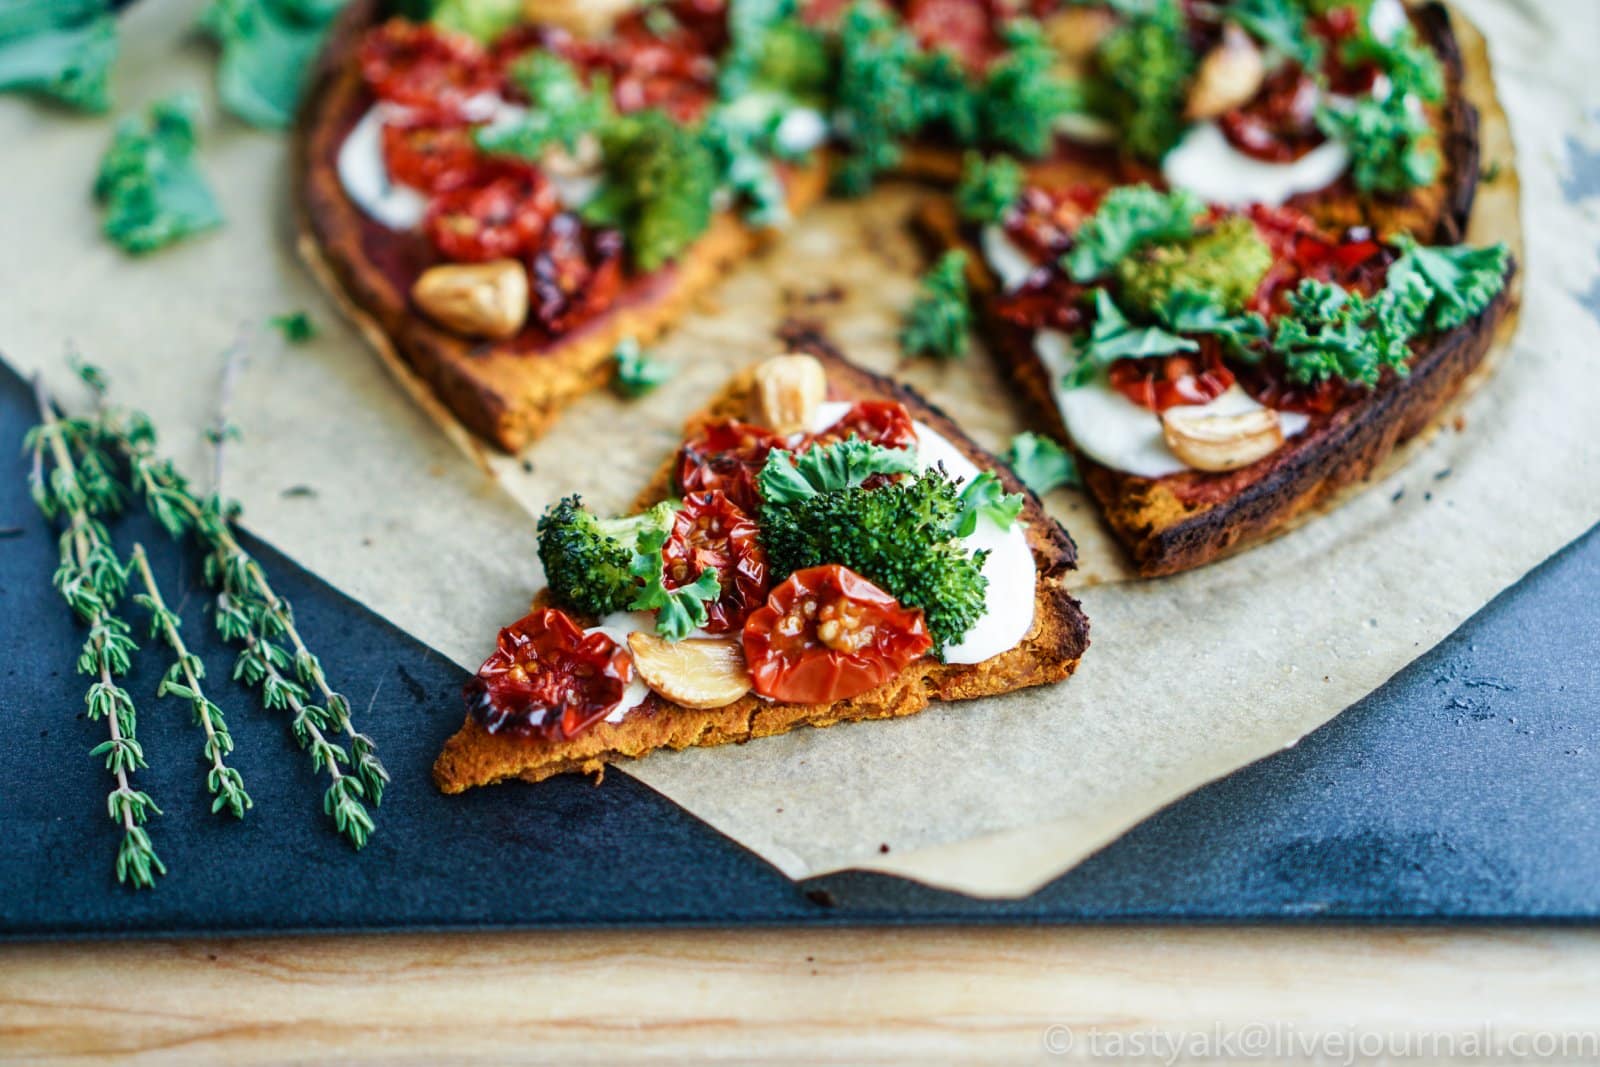 Image Credit: Shutterstock / AnastasiaKopa <p><span>Forget the deep-dish for a moment and indulge in the simplicity of a thin, wood-fired pizza from Naples, topped with San Marzano tomatoes, mozzarella cheese, and fresh basil.</span></p>